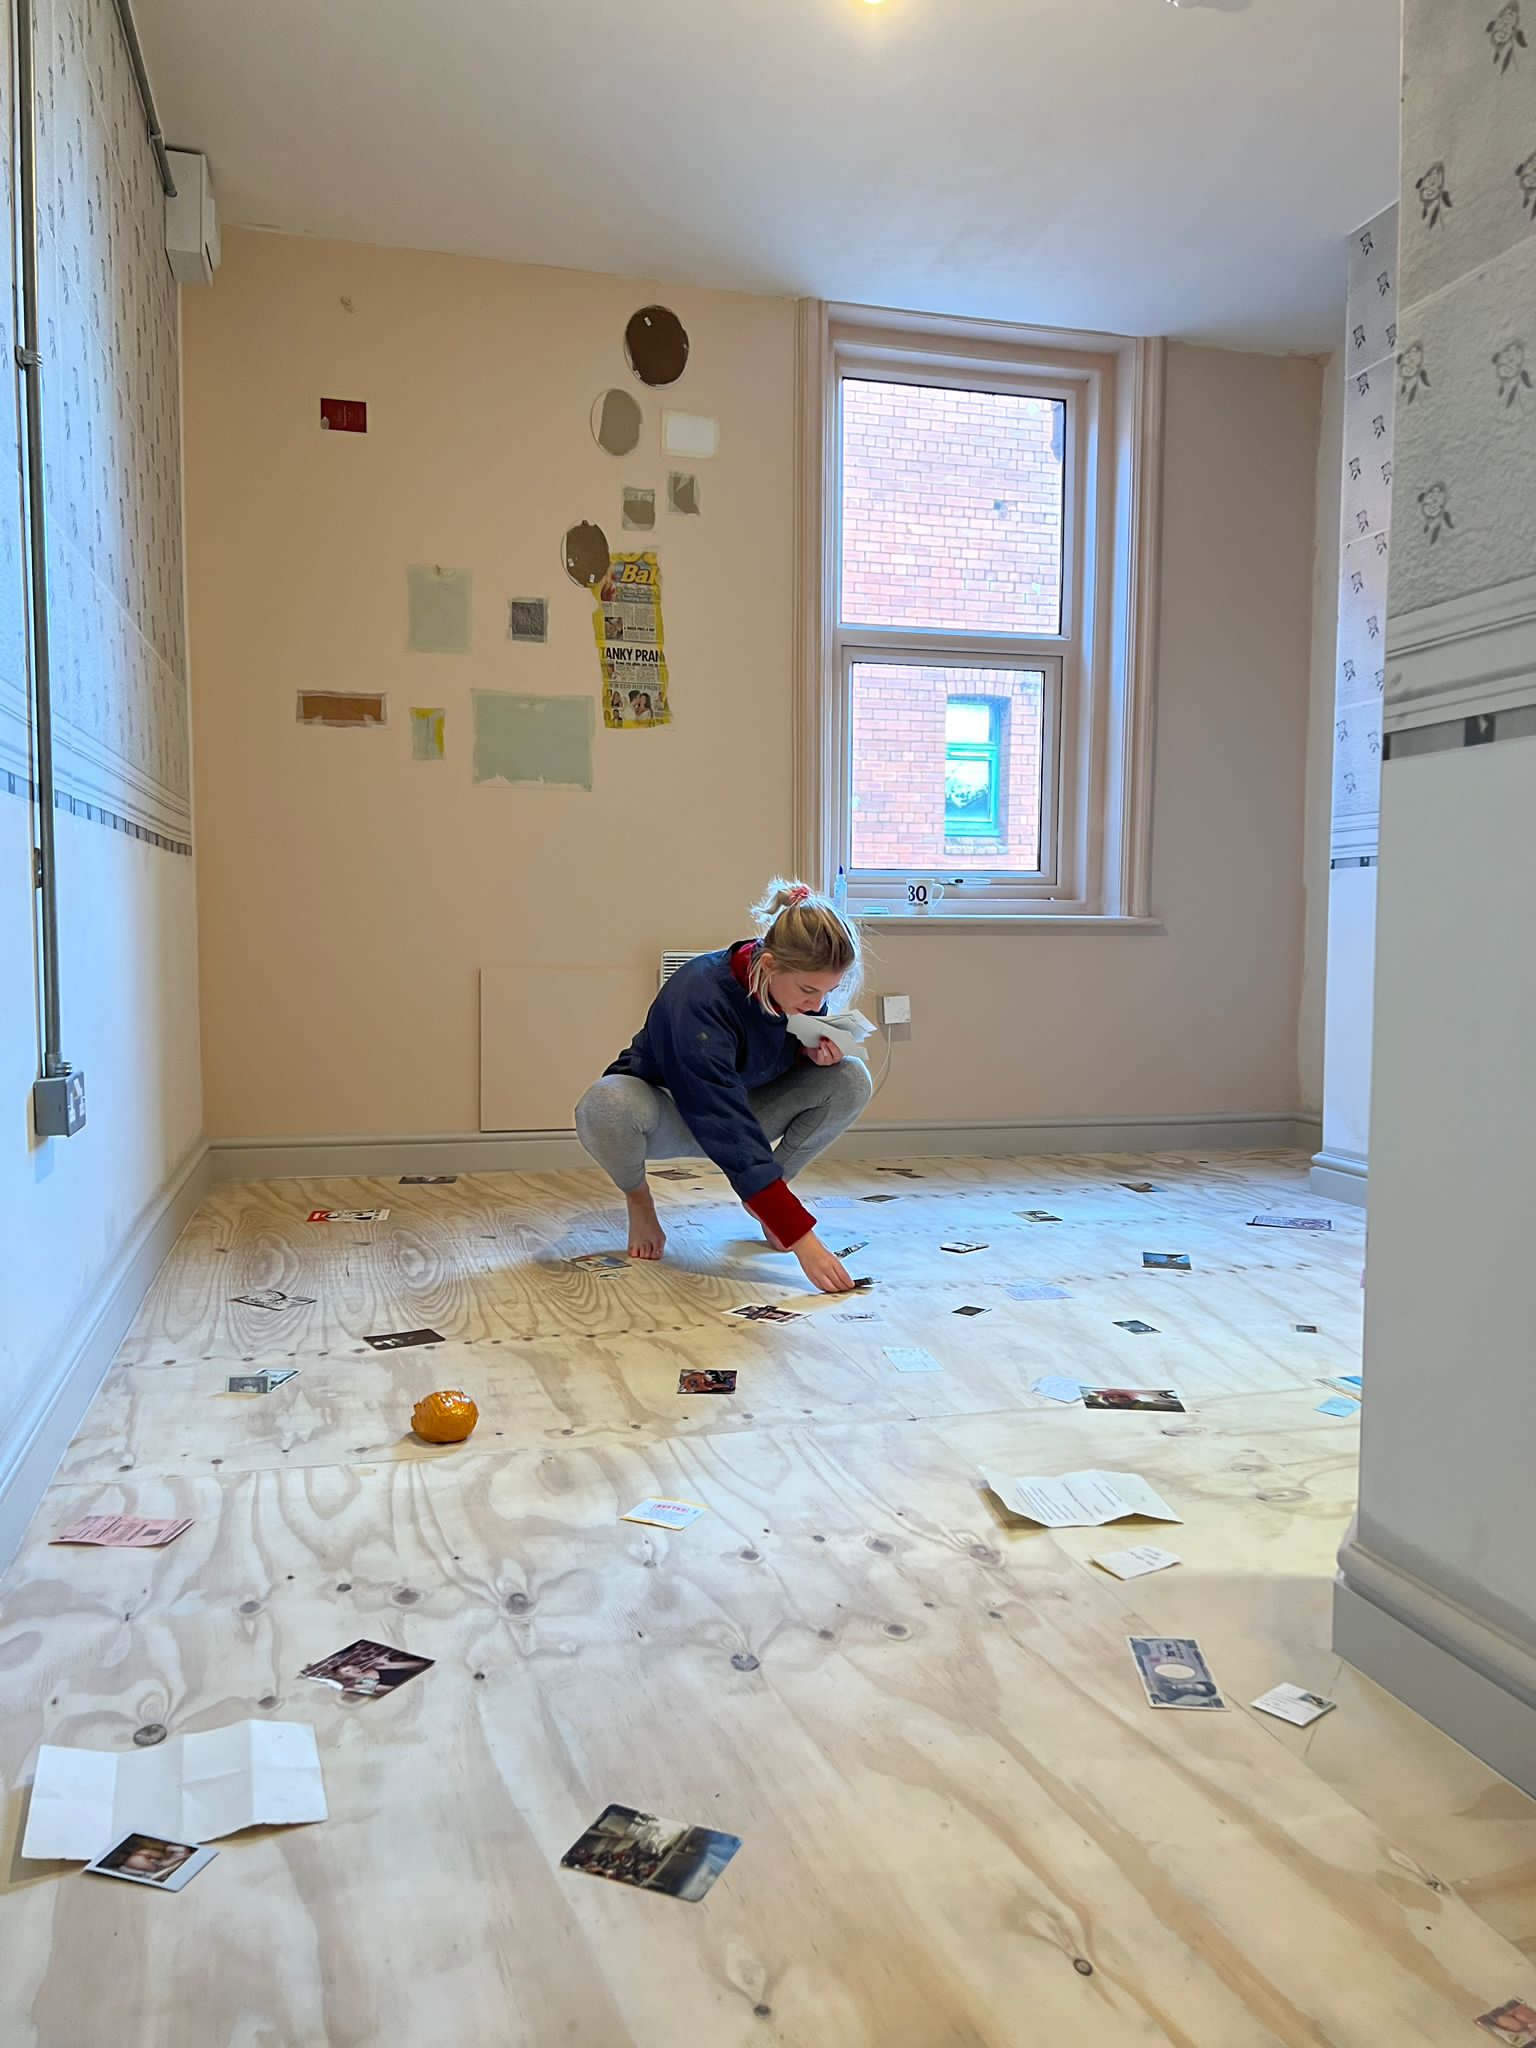 Emma creating the base layer of a floor for her commission at he Art Hostel. The wooden floor is covered in confetti, party poppers, photos, postcards, notes, ticket subs and other ephemera. Emma is knelt down adding more pieces.